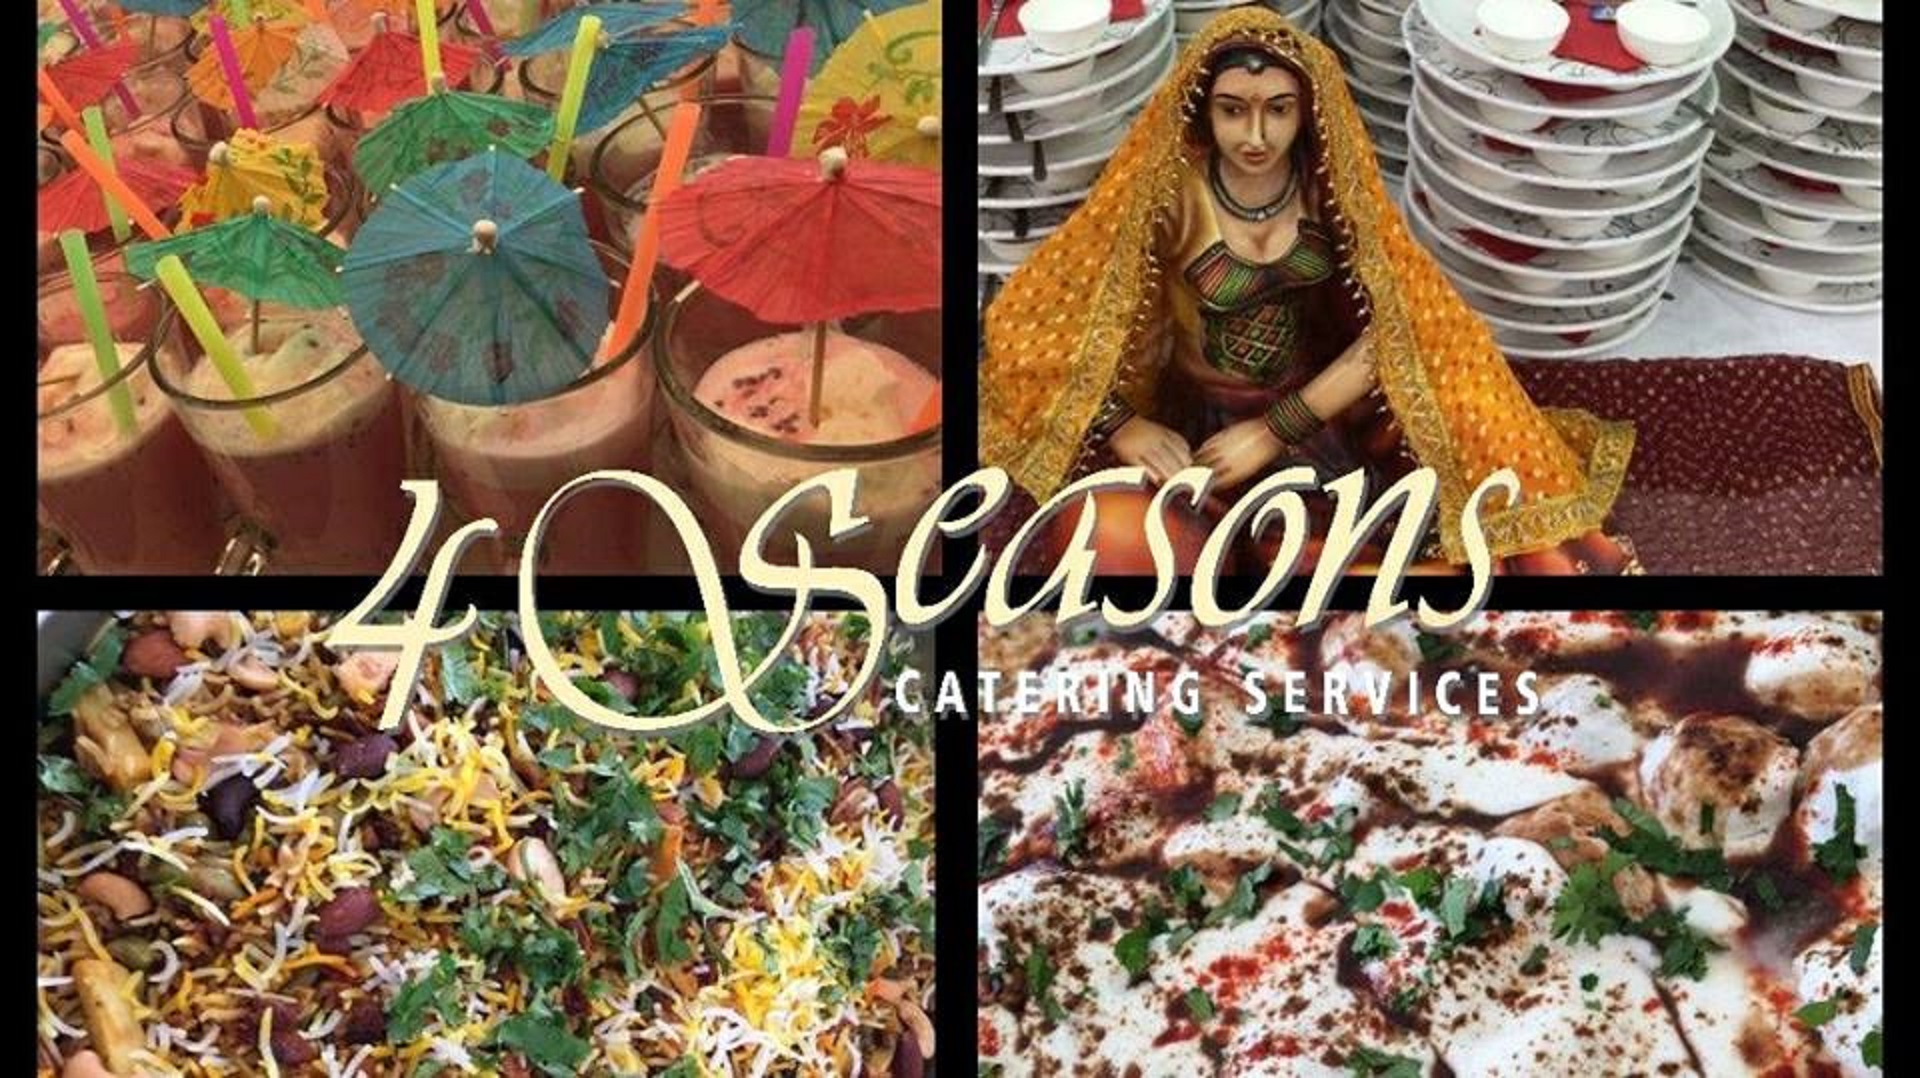 4 Seasons Catering Services